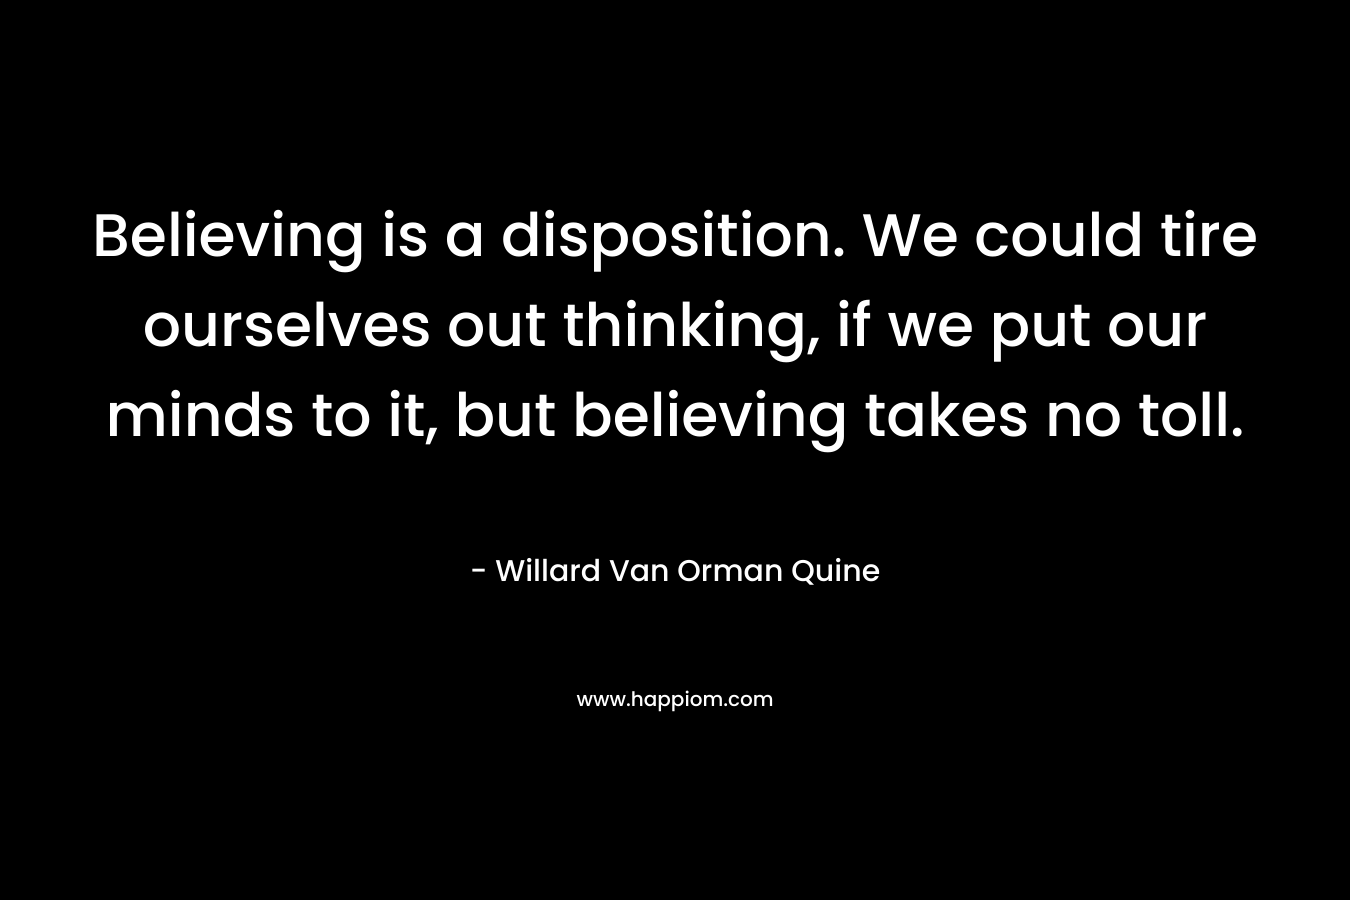 Believing is a disposition. We could tire ourselves out thinking, if we put our minds to it, but believing takes no toll.